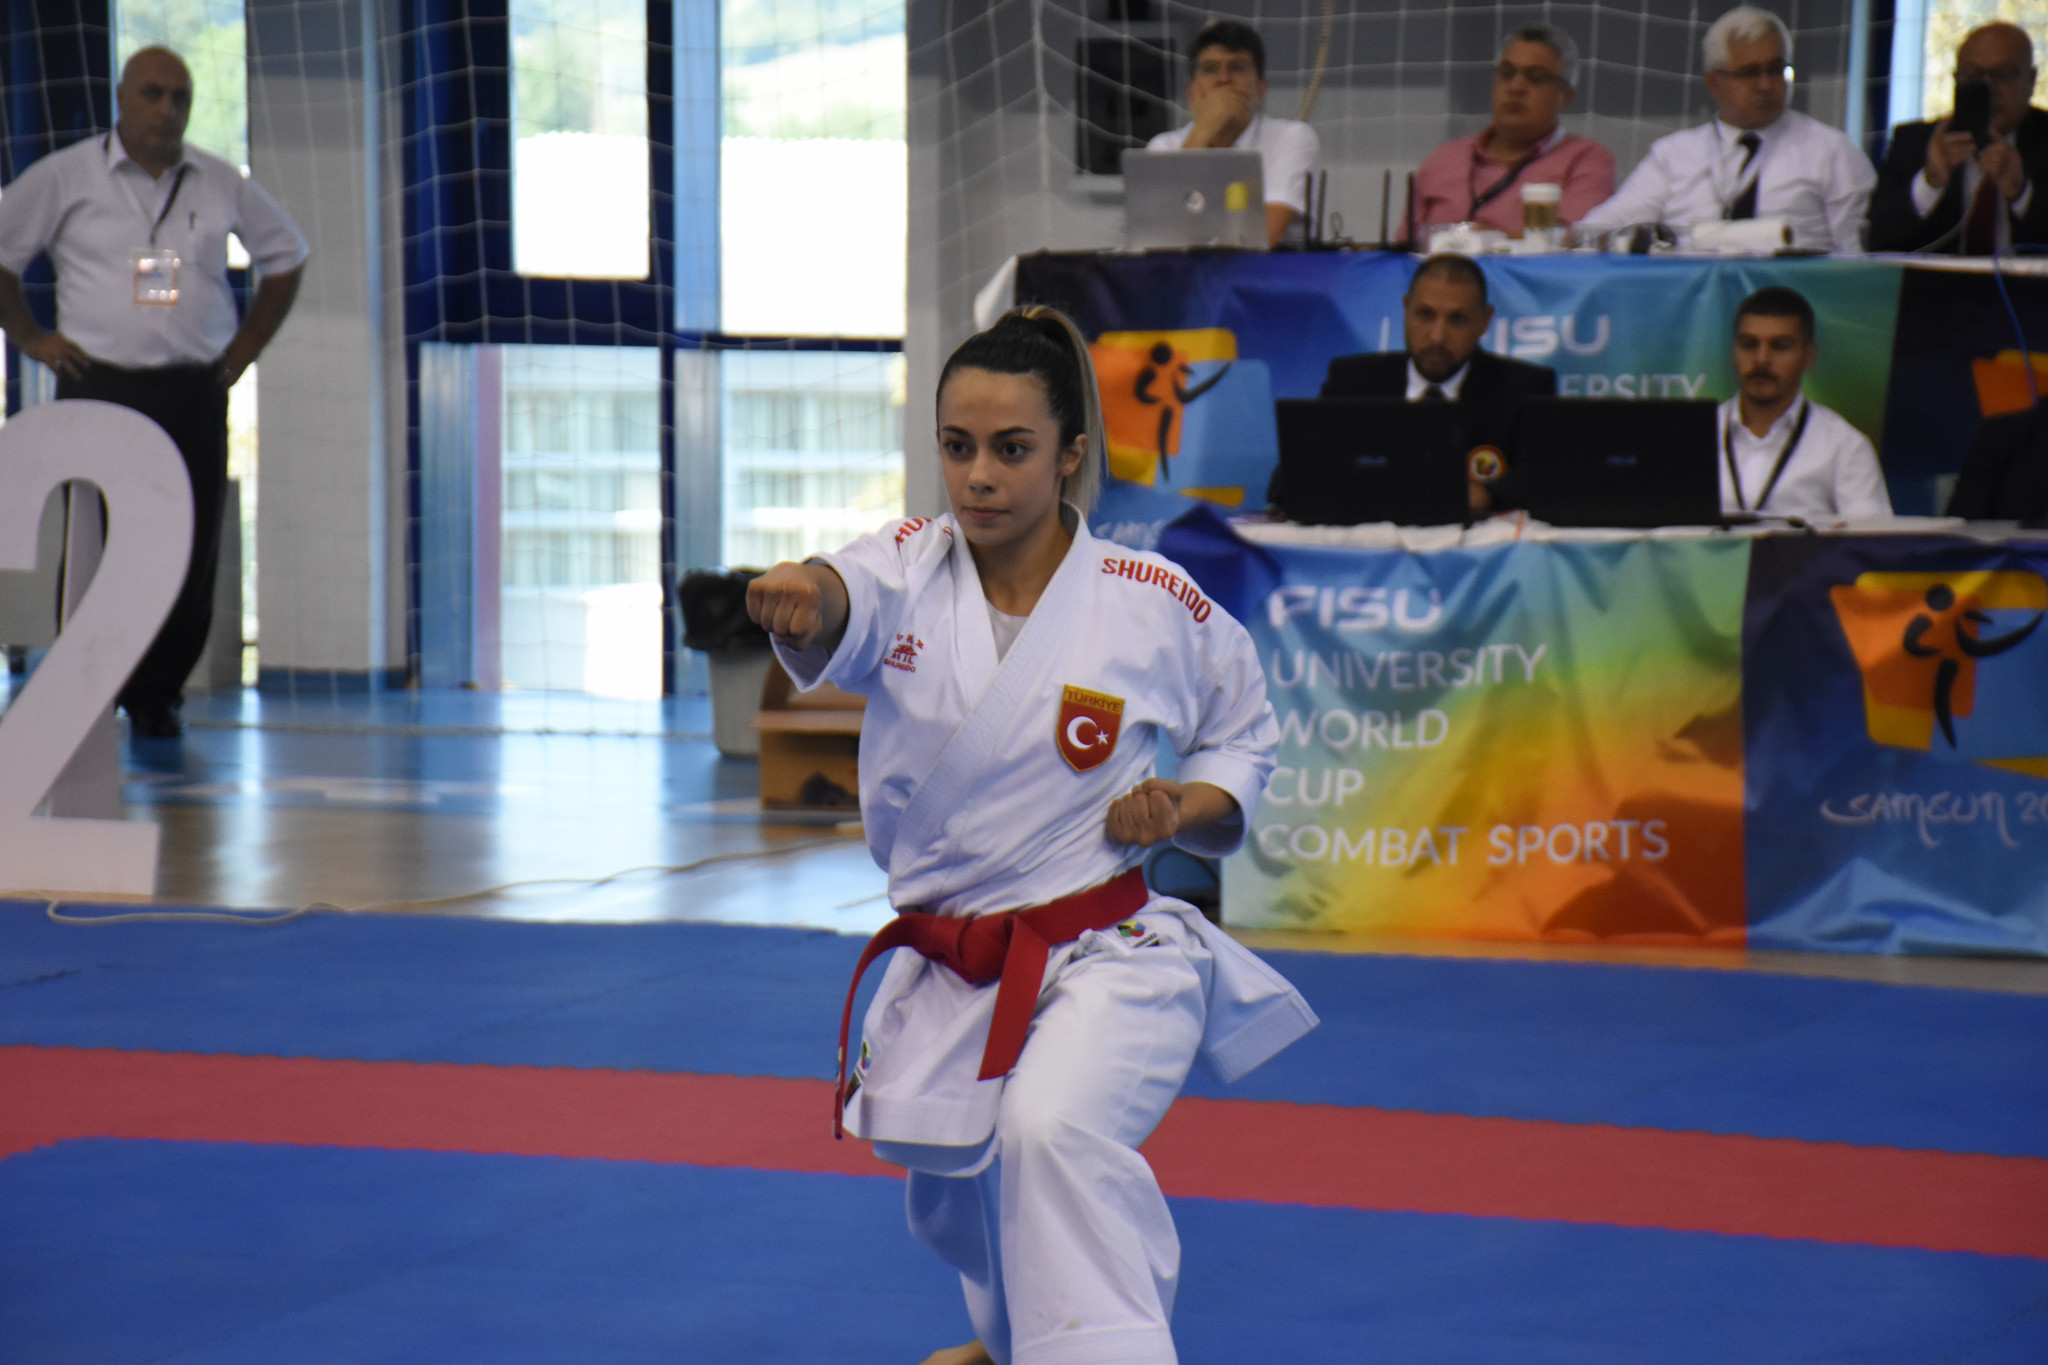 Turkey finishes top of medal table as FISU World Cup Combat Sports closes